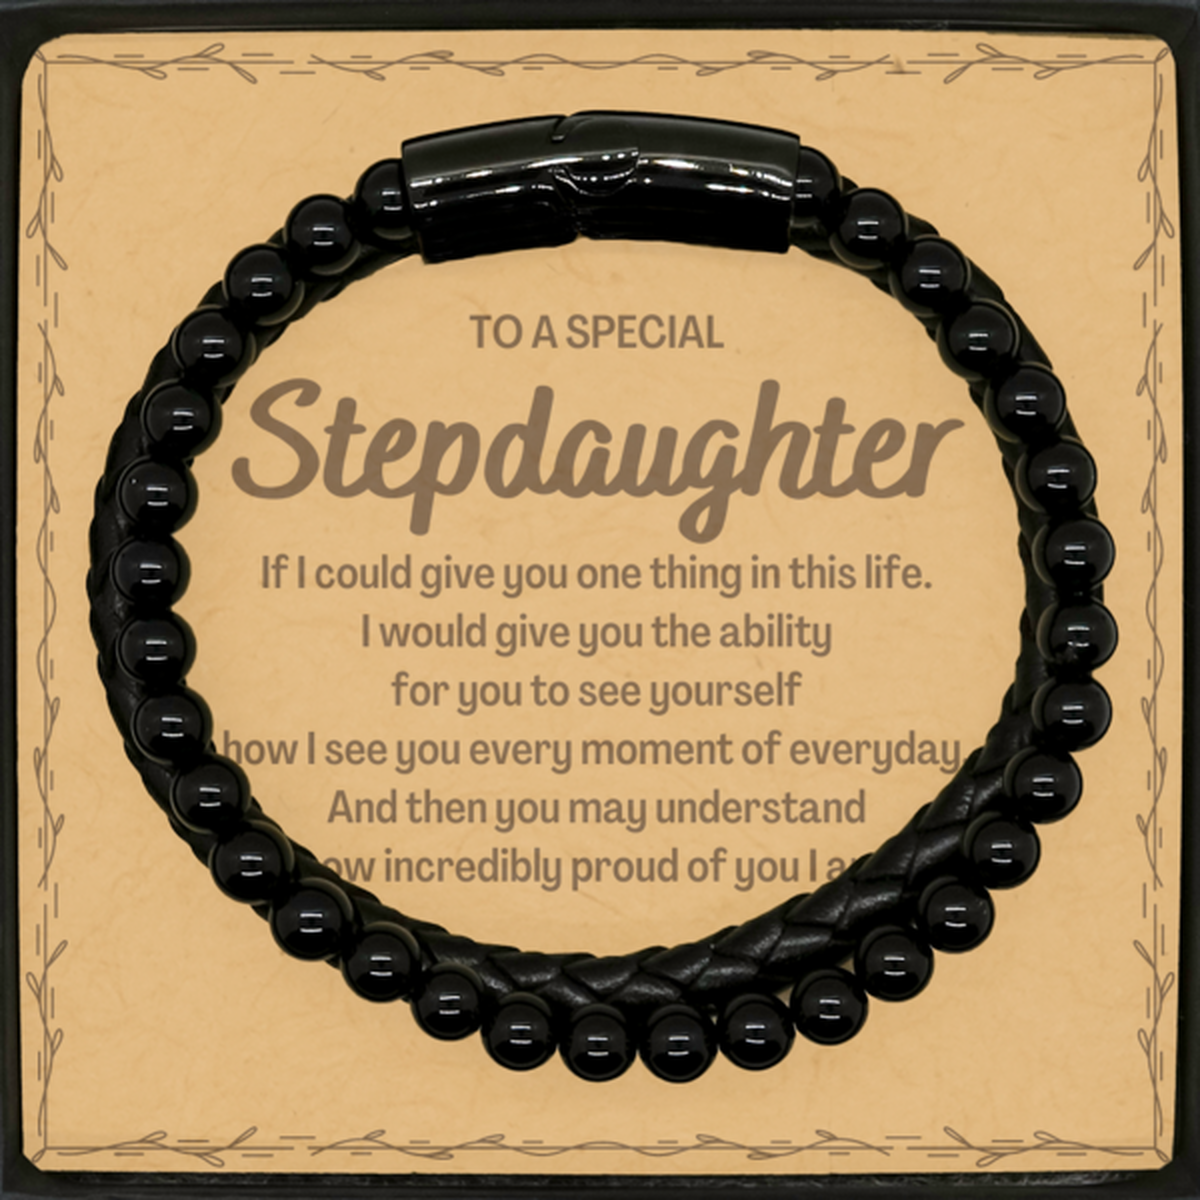 To My Stepdaughter Stone Leather Bracelets, Gifts For Stepdaughter Message Card, Inspirational Gifts for Christmas Birthday, Epic Gifts for Stepdaughter To A Special Stepdaughter how incredibly proud of you I am